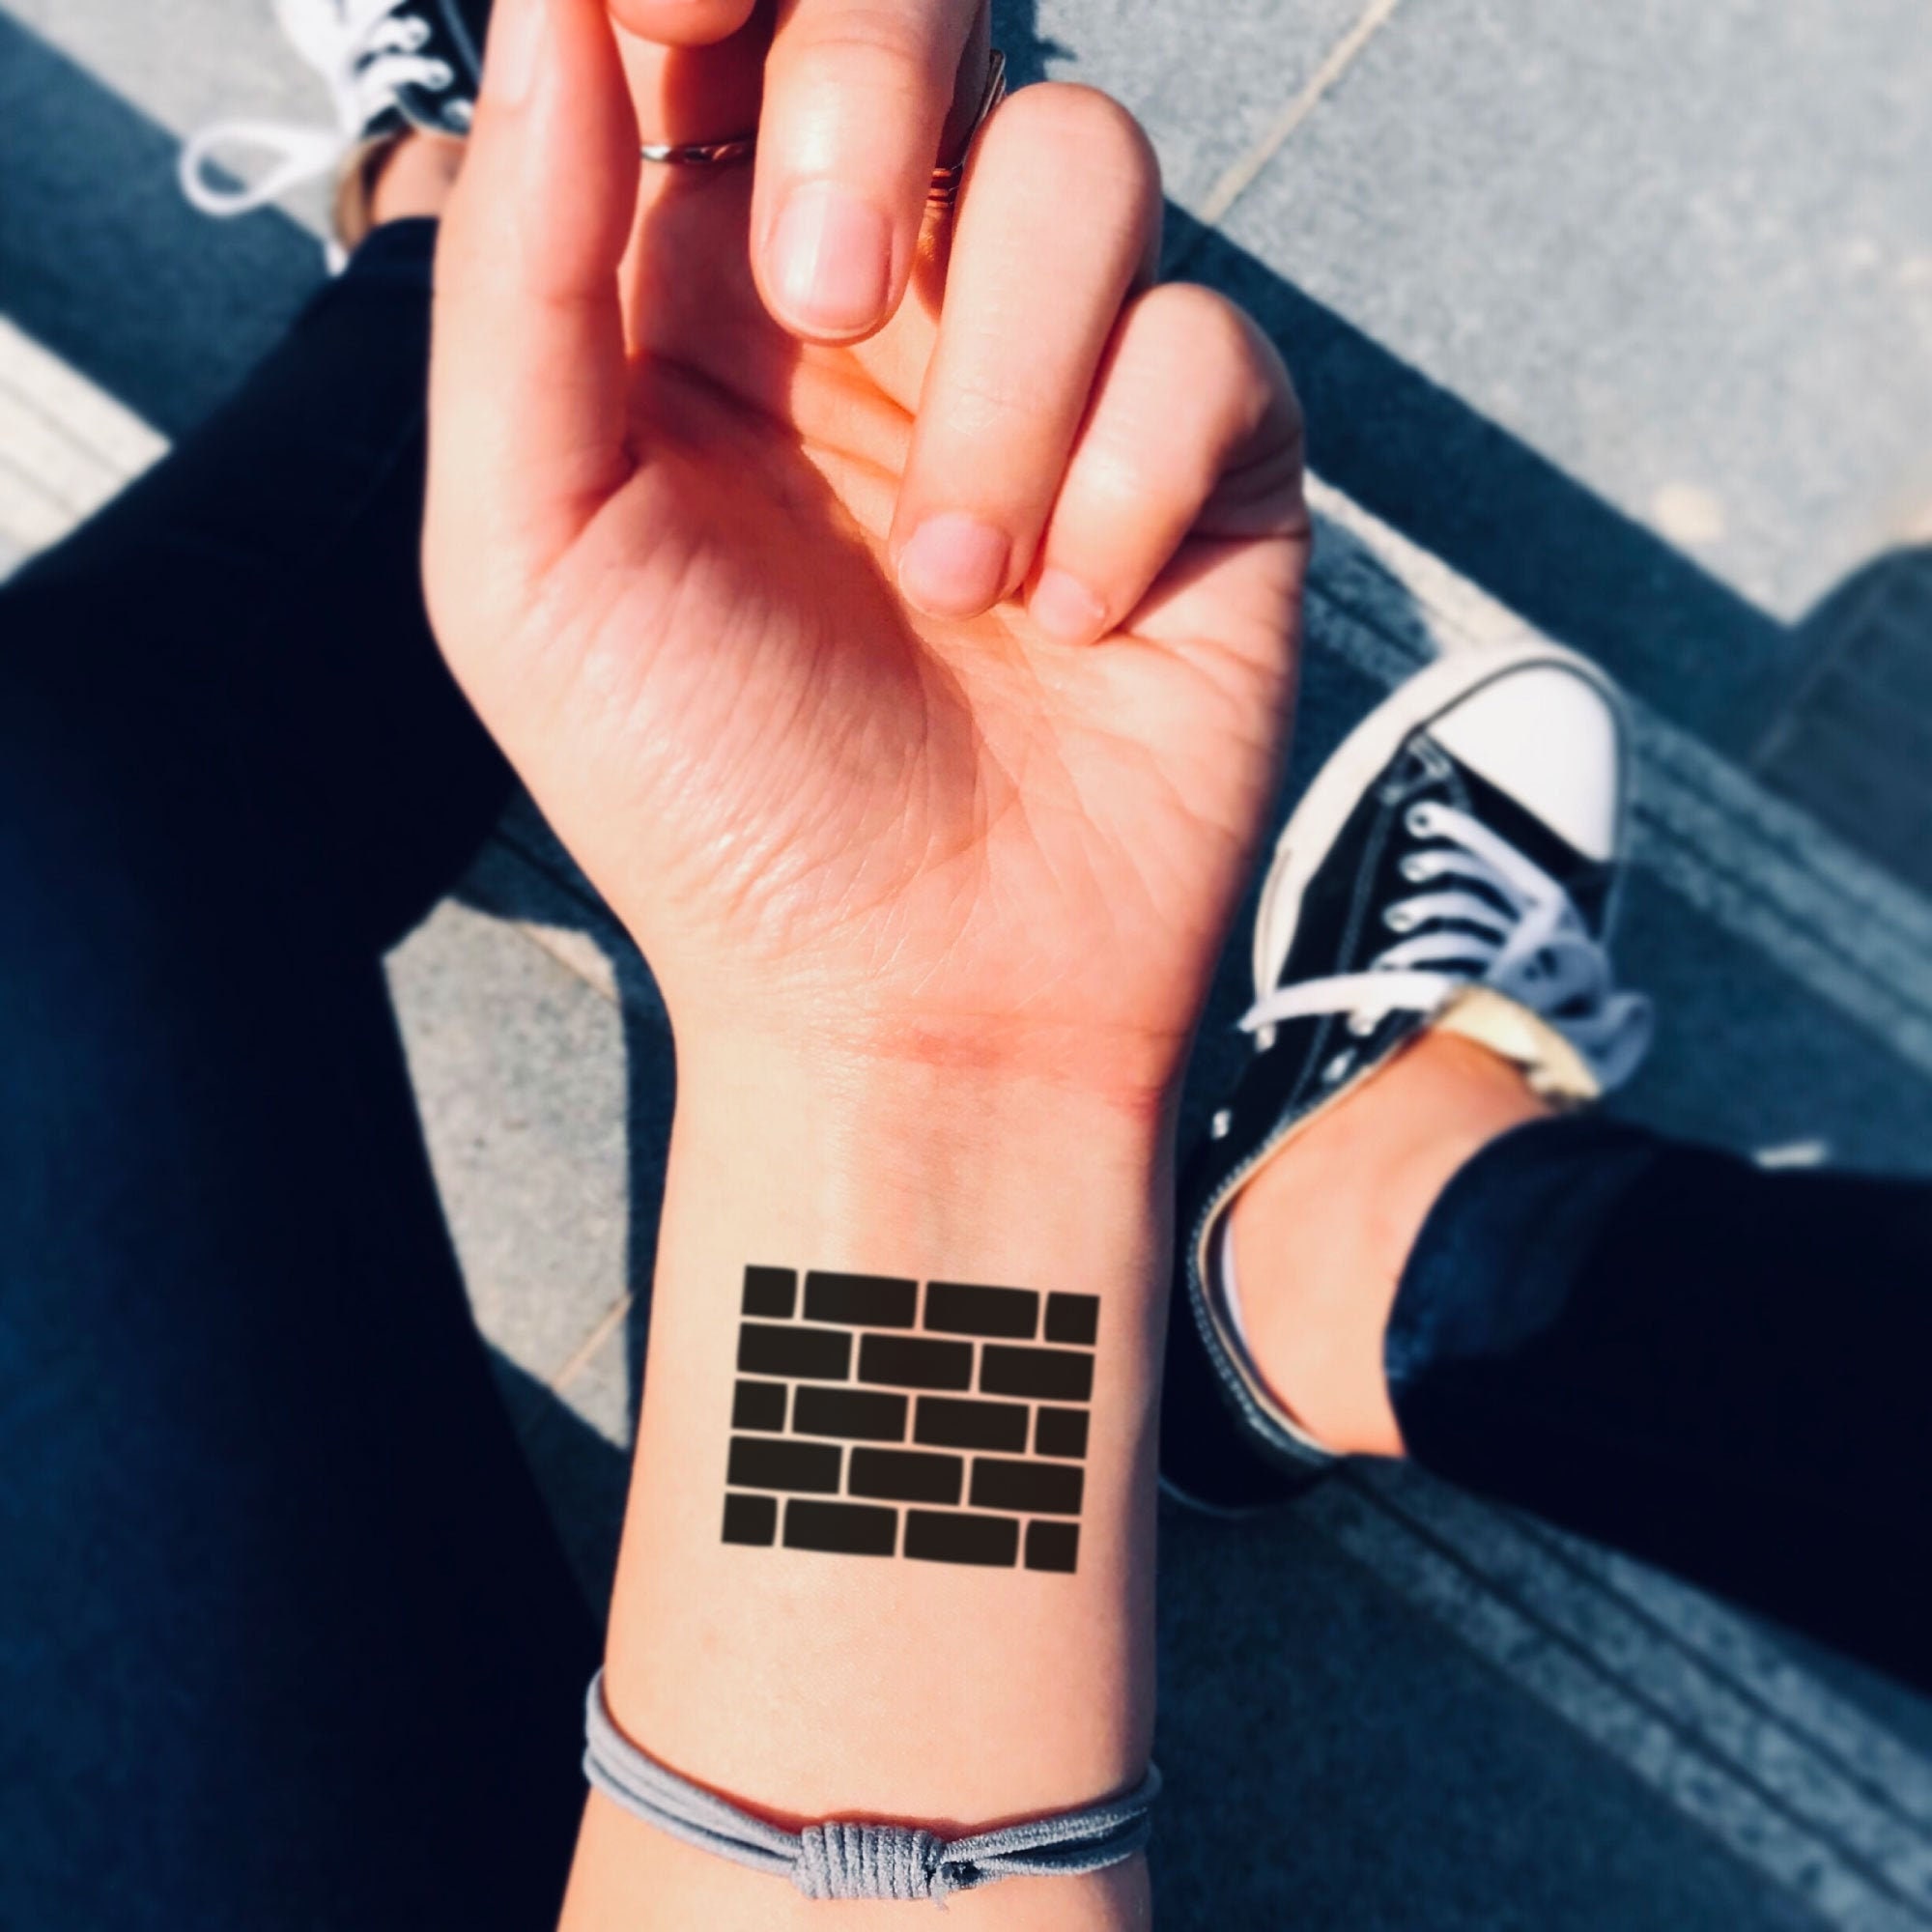 Sometimes you just have to be soft like a brick tattoo and flash by  resident artist victordevenir  Instagram